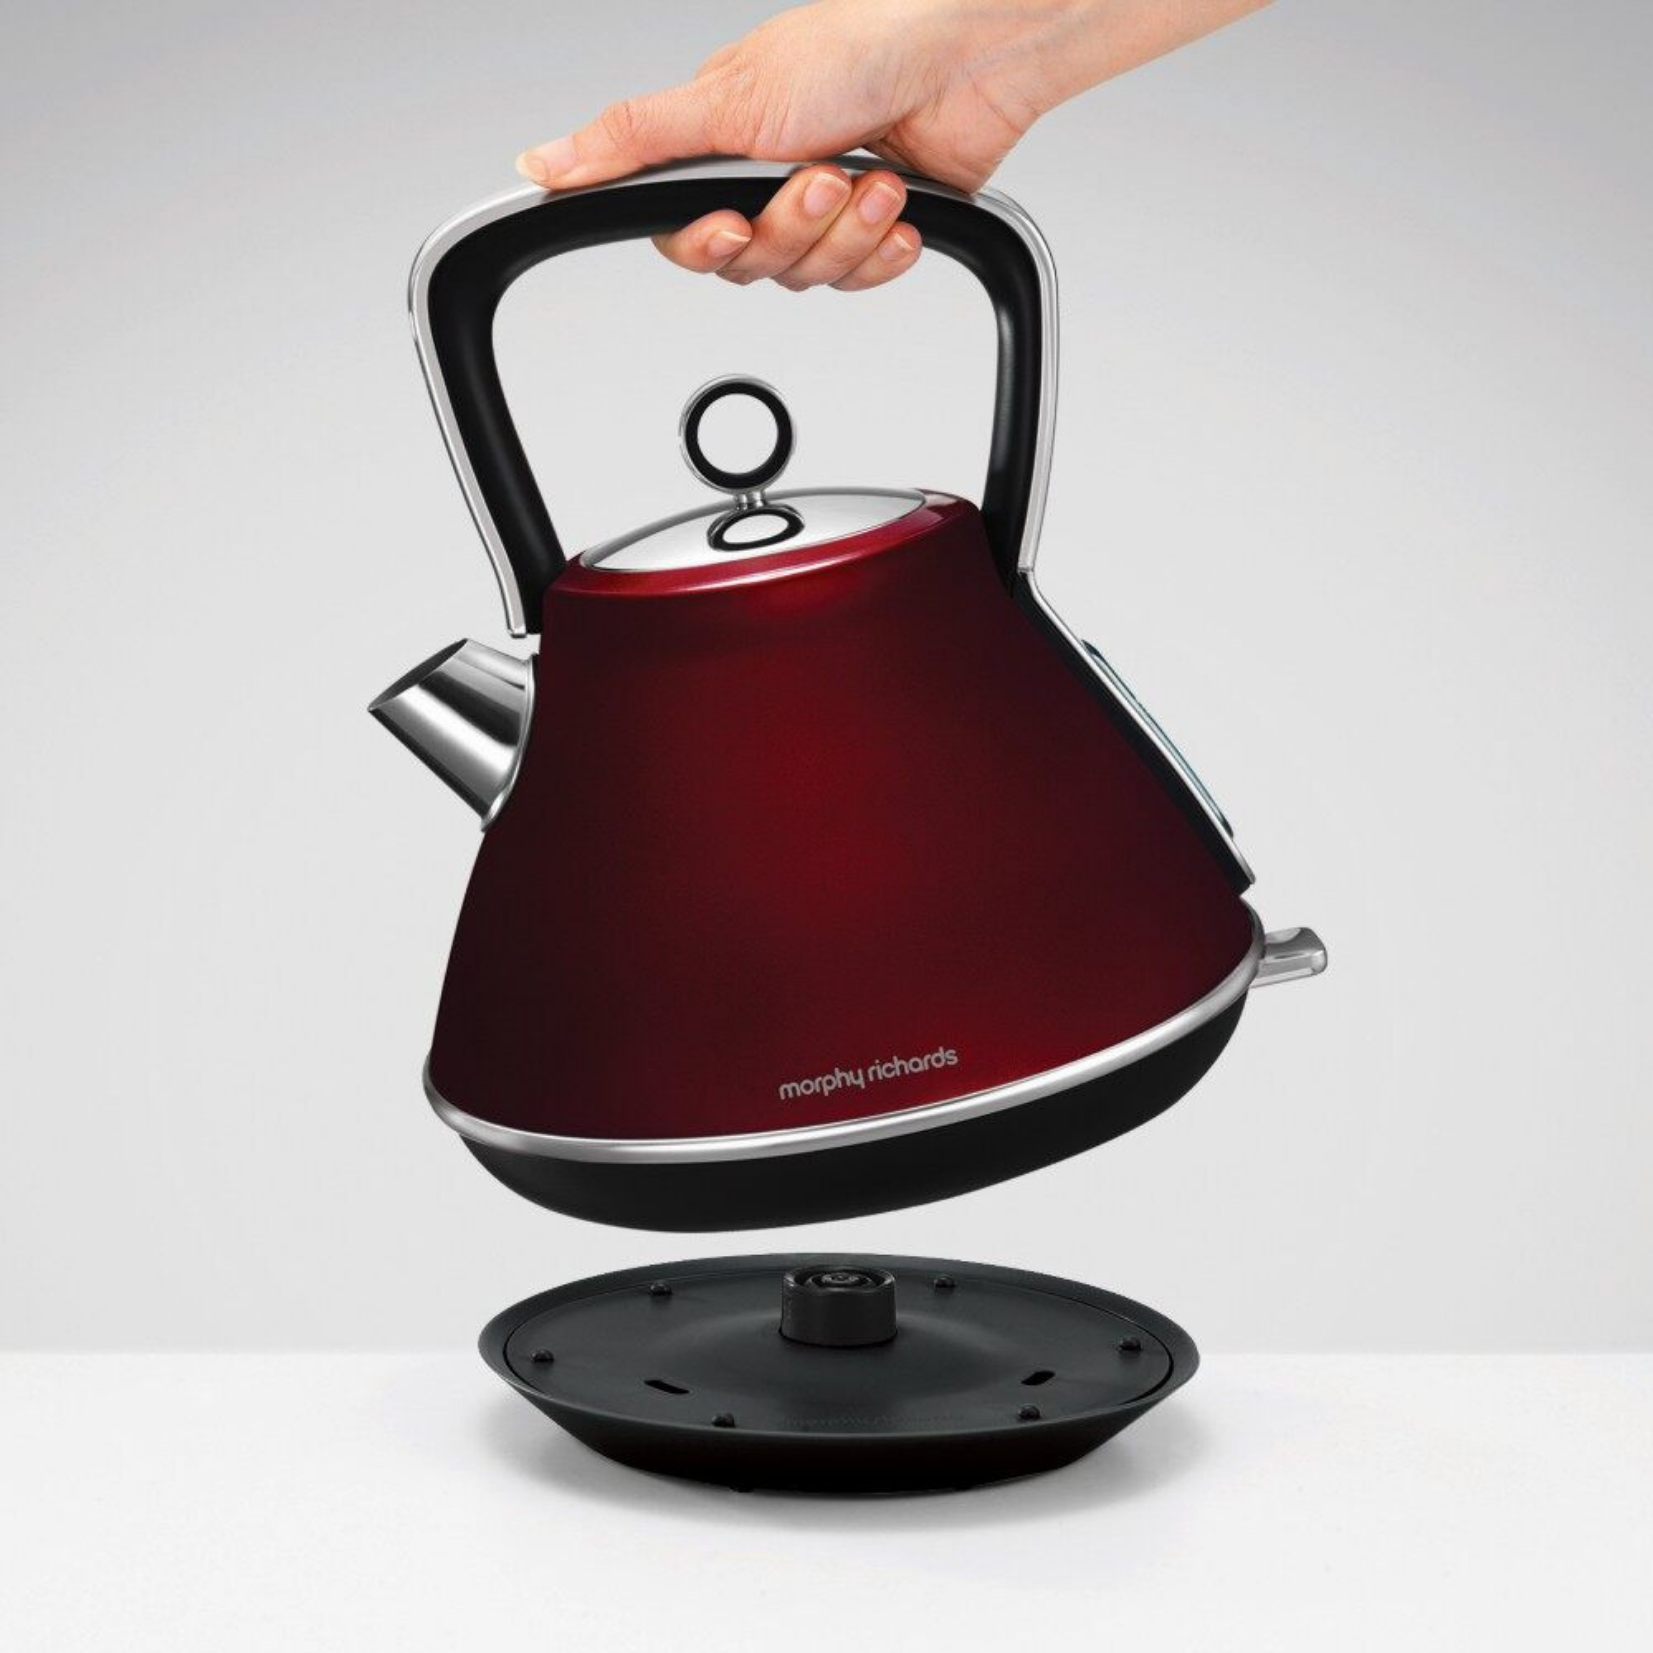 Morphy Richards Kettle Evoke Pyramid Red - 1.5L Capacity 2.2kw Power Water Level Indication